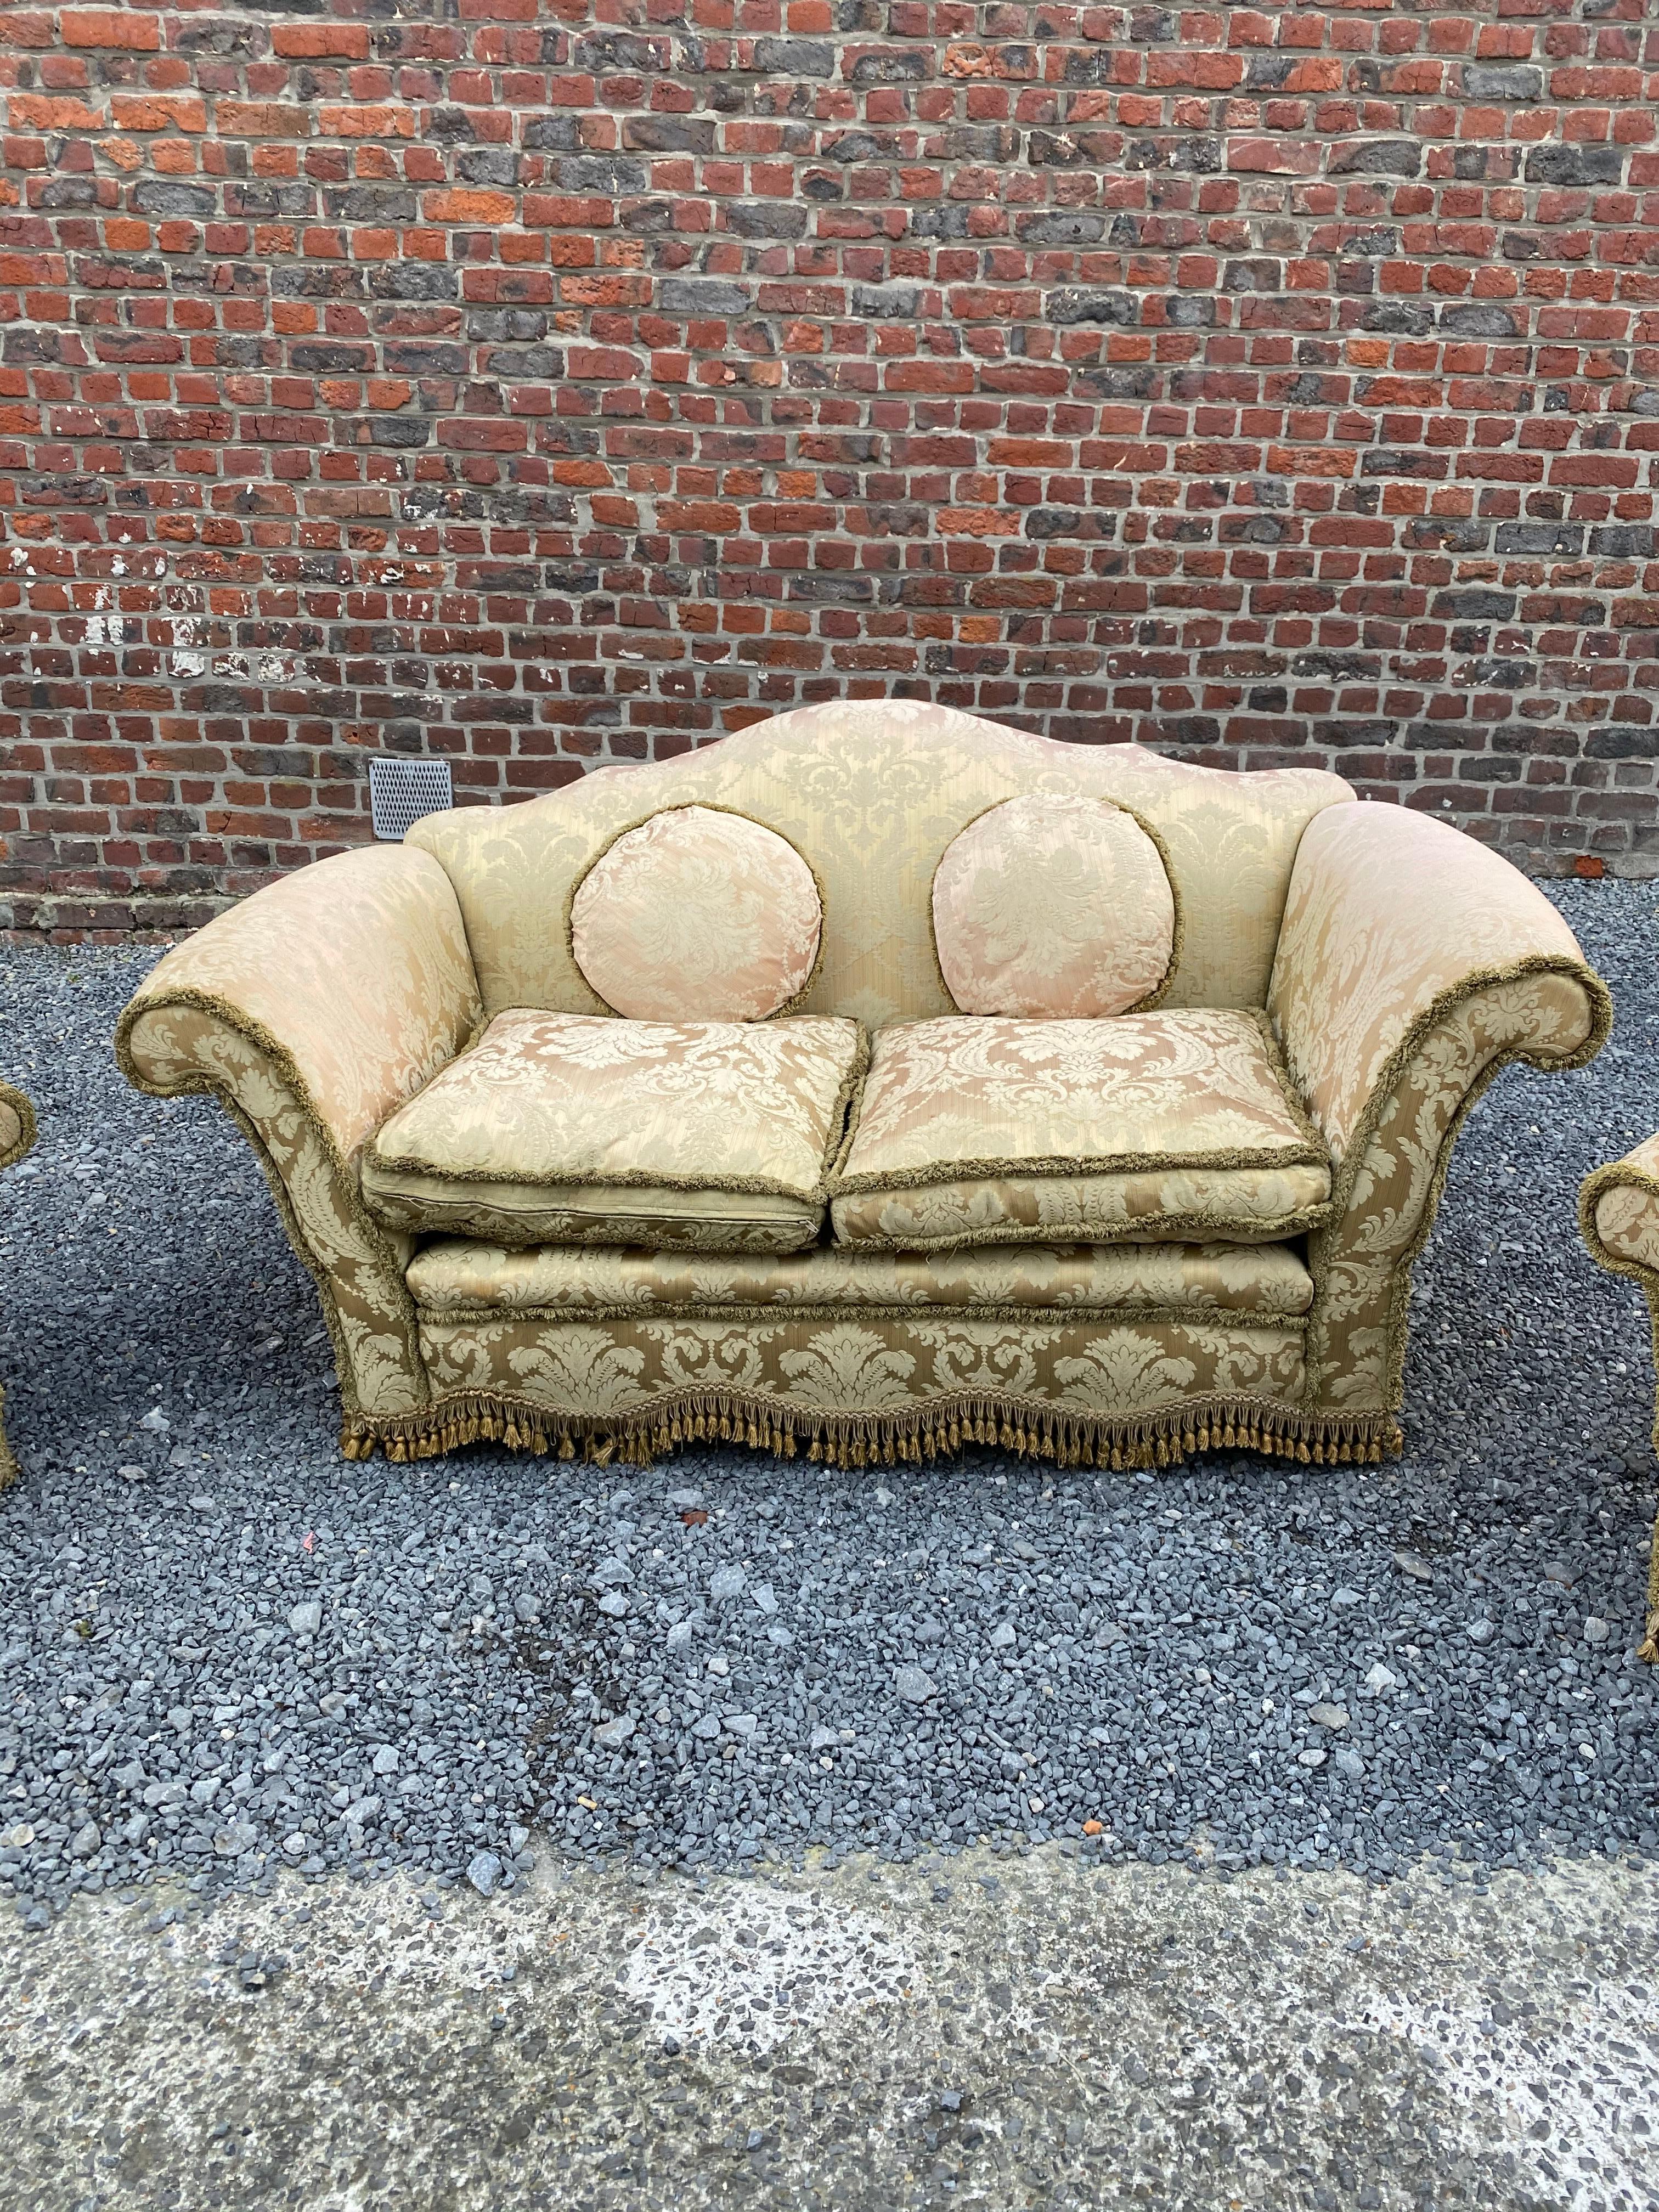 Upholstery Salon Set Neo Baroque / Rococo circa 1930 to Fully Restore For Sale